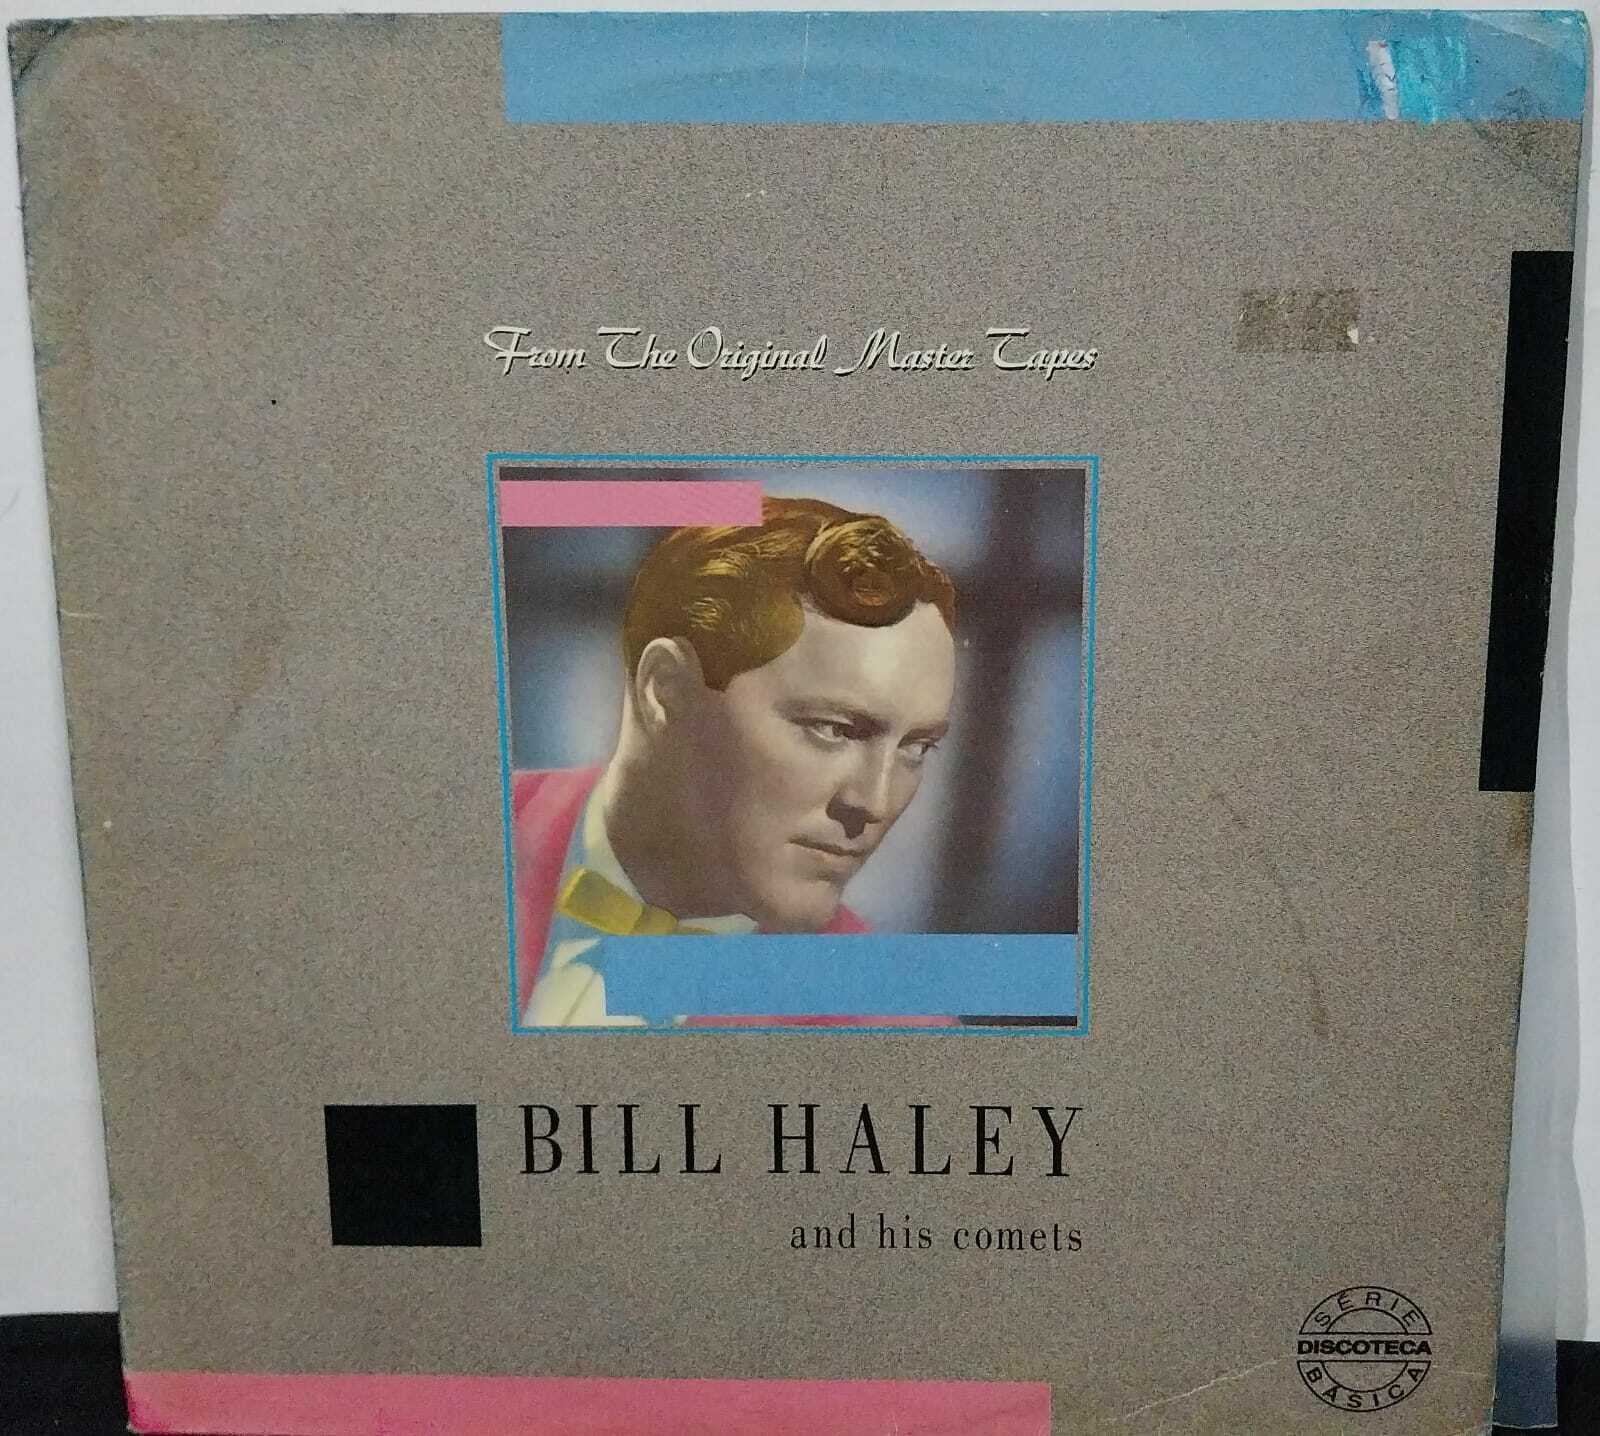 Vinil - Bill Haley And His Comets - From The Original Master Tapes